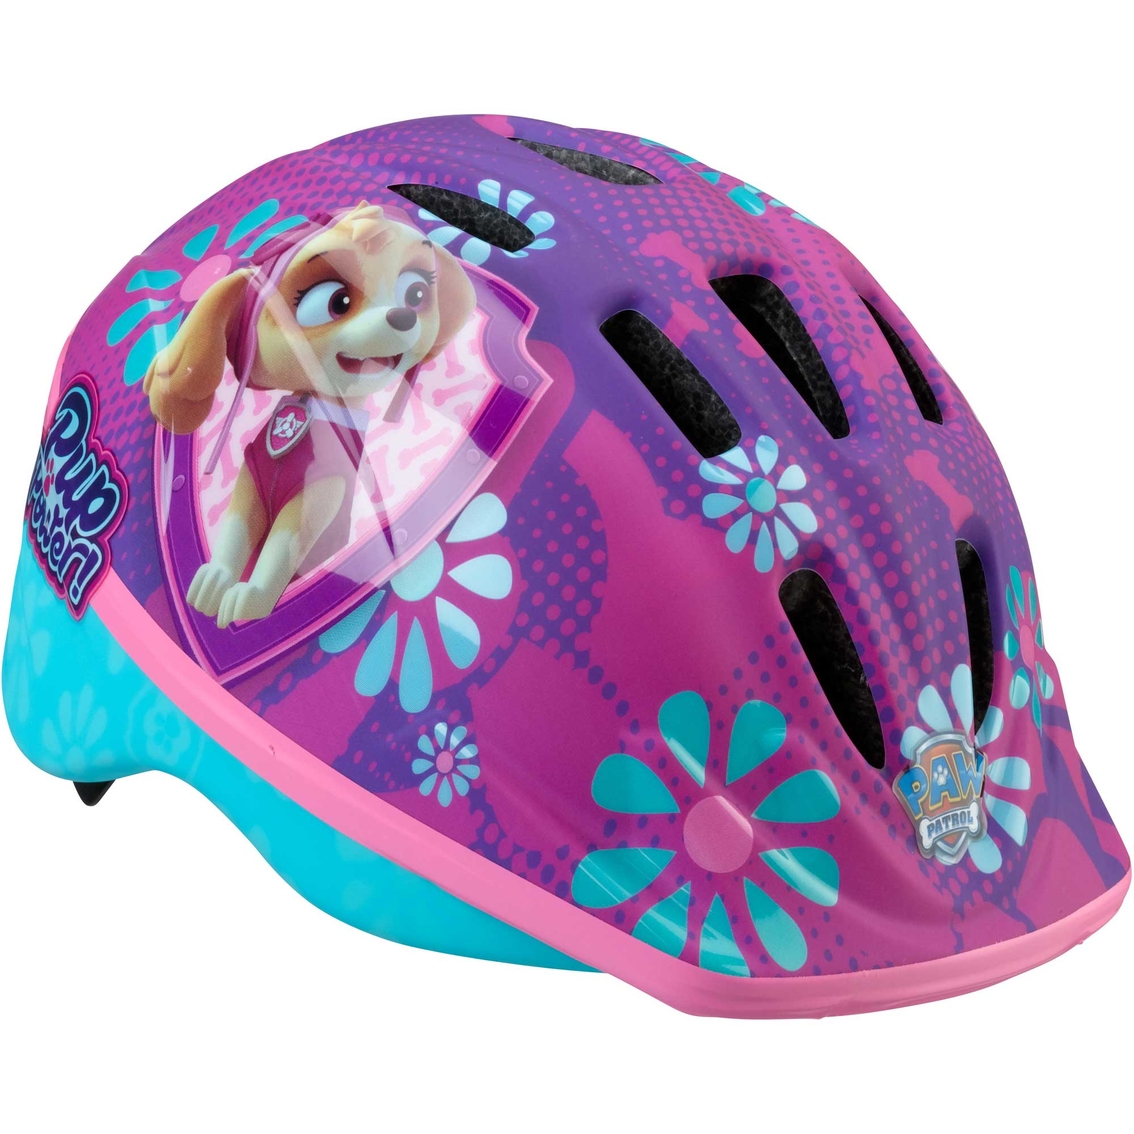 yellow NEW Nickelodeon's PAW Patrol Toddler Bicycle Helmet ages 3-5 blue 